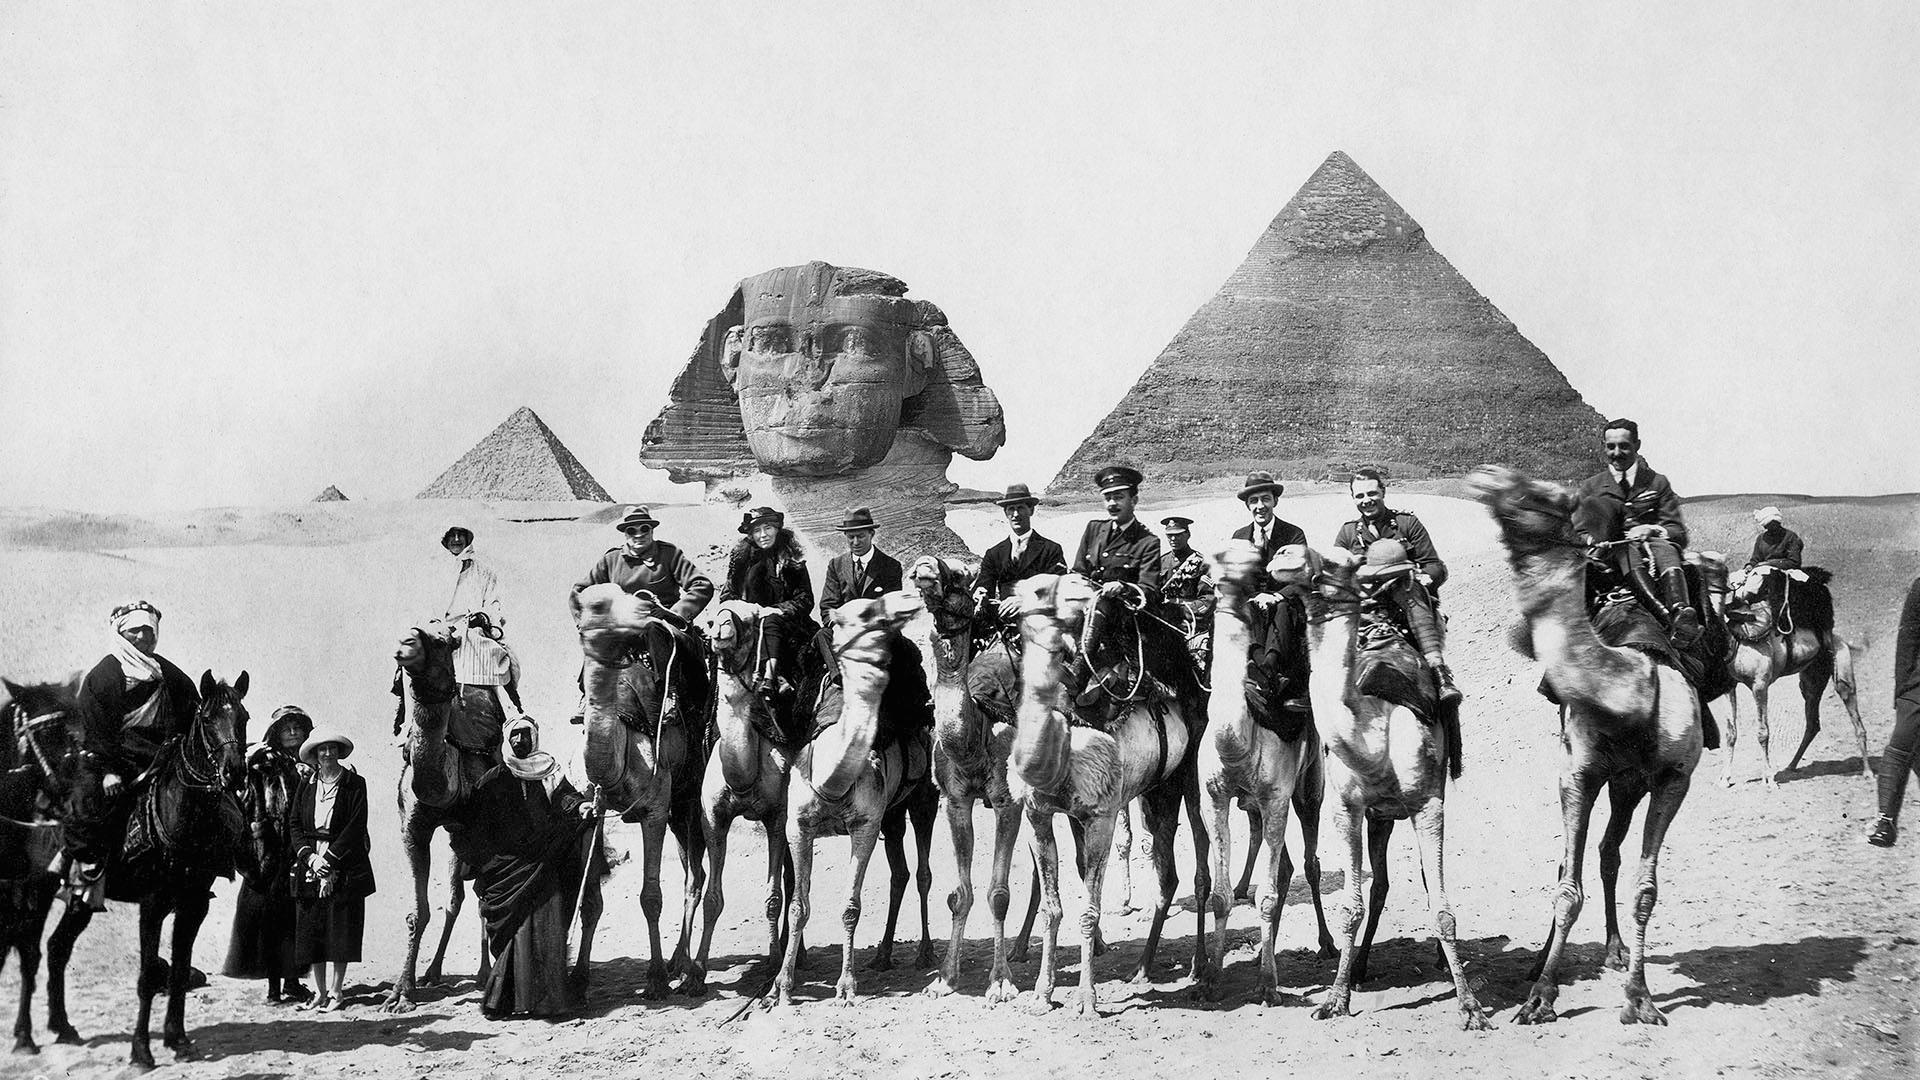 Cairo Conference, 1921, with Gertrude Bell, T.E. Lawrence, and Winston Churchill on camels.